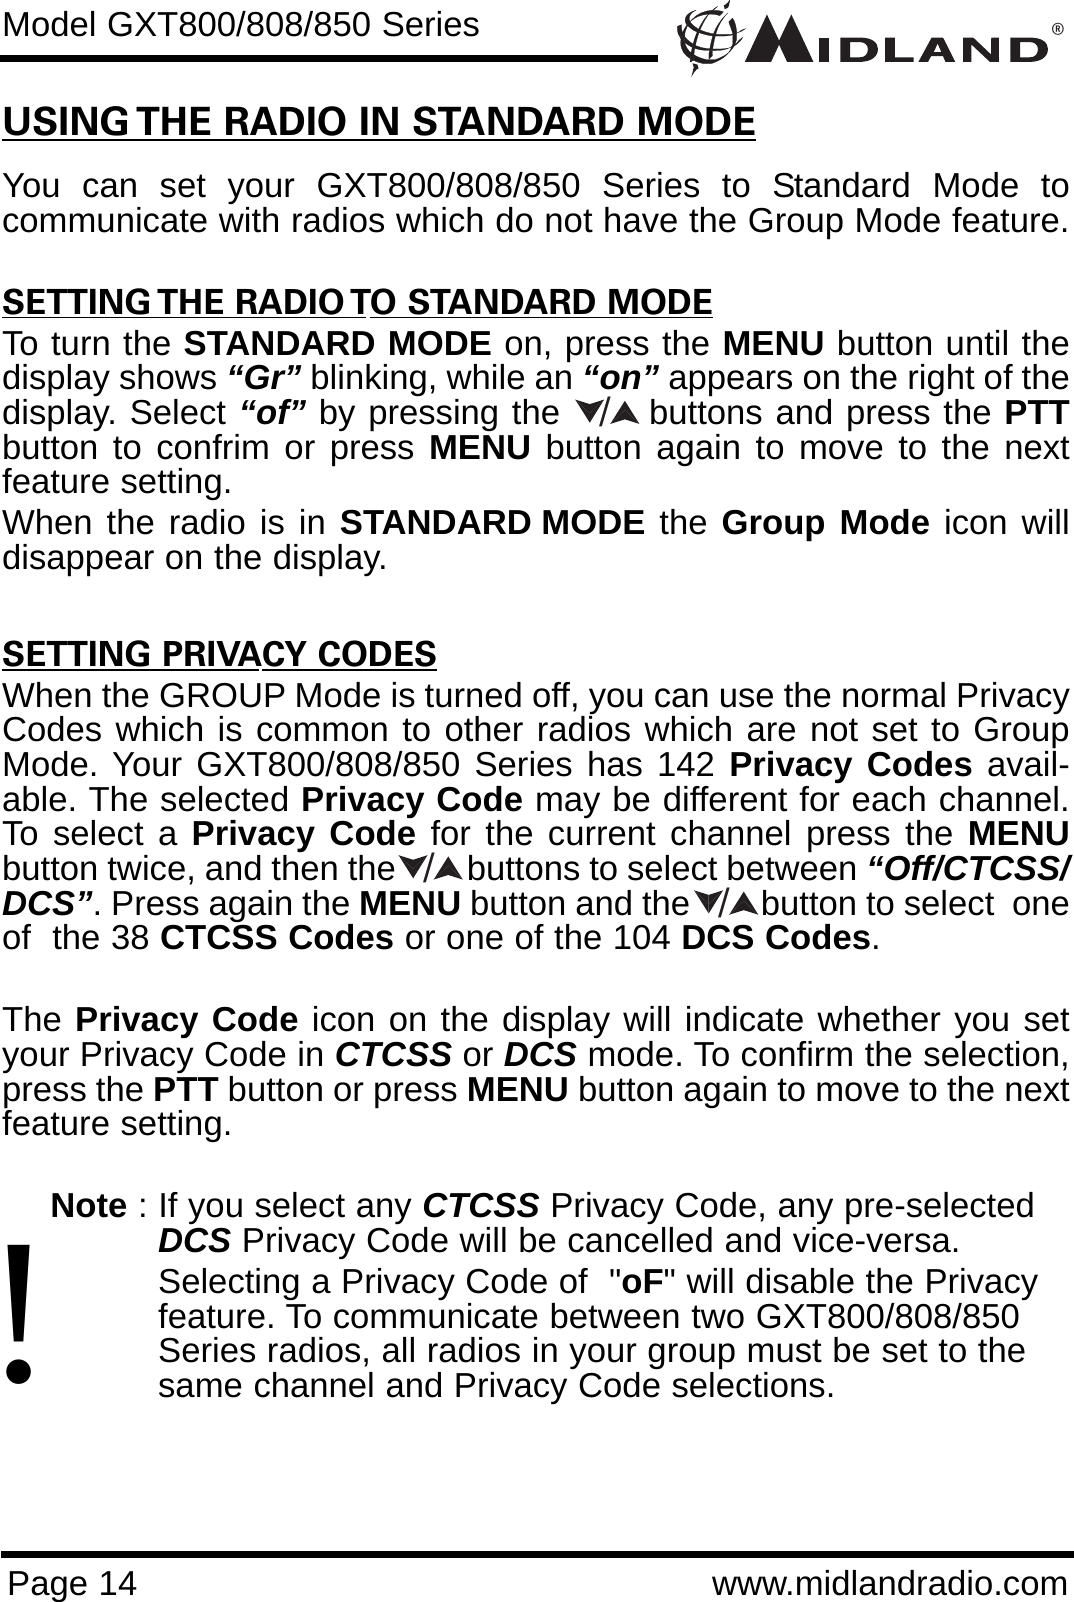 ®Page 14 www.midlandradio.comModel GXT800/808/850 SeriesUSING THE RADIO IN STANDARD MODEYou can set your GXT800/808/850 Series to Standard Mode tocommunicate with radios which do not have the Group Mode feature. SETTING THE RADIO TO STANDARD MODETo turn the STANDARD MODE on, press the MENU button until thedisplay shows “Gr” blinking, while an “on” appears on the right of thedisplay. Select “of” by pressing the       buttons and press the PTTbutton to confrim or press MENU button again to move to the nextfeature setting. When the radio is in STANDARD MODE the Group Mode icon willdisappear on the display.SETTING PRIVACY CODESWhen the GROUP Mode is turned off, you can use the normal PrivacyCodes which is common to other radios which are not set to GroupMode. Your GXT800/808/850 Series has 142 Privacy Codes avail-able. The selected Privacy Code may be different for each channel.To select a Privacy Code for the current channel press the MENUbutton twice, and then the        buttons to select between “Off/CTCSS/DCS”. Press again the MENU button and the        button to select  oneof  the 38 CTCSS Codes or one of the 104 DCS Codes. The Privacy Code icon on the display will indicate whether you setyour Privacy Code in CTCSS or DCS mode. To confirm the selection,press the PTT button or press MENU button again to move to the nextfeature setting.Note : If you select any CTCSS Privacy Code, any pre-selected DCS Privacy Code will be cancelled and vice-versa.Selecting a Privacy Code of  &quot;oF&quot; will disable the Privacy feature. To communicate between two GXT800/808/850 Series radios, all radios in your group must be set to the same channel and Privacy Code selections.///!